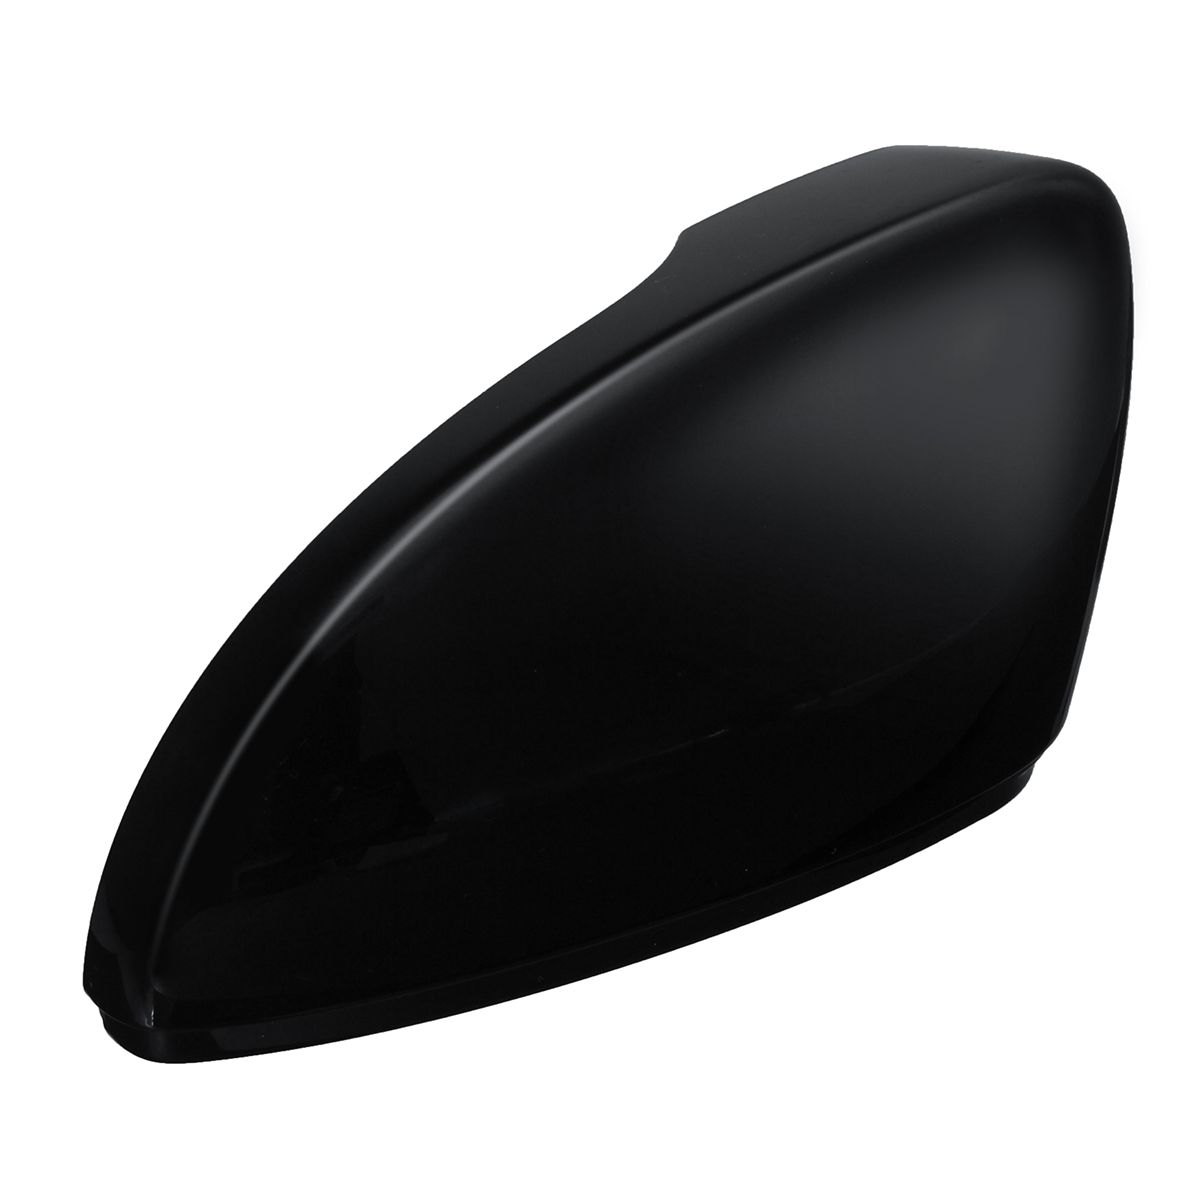 2-Pcs-Rear-View-Wing-Mirror-Covers-Caps-For-VW-Beetle-CC-Eos-Passat-Jetta-Scirocco-1249225